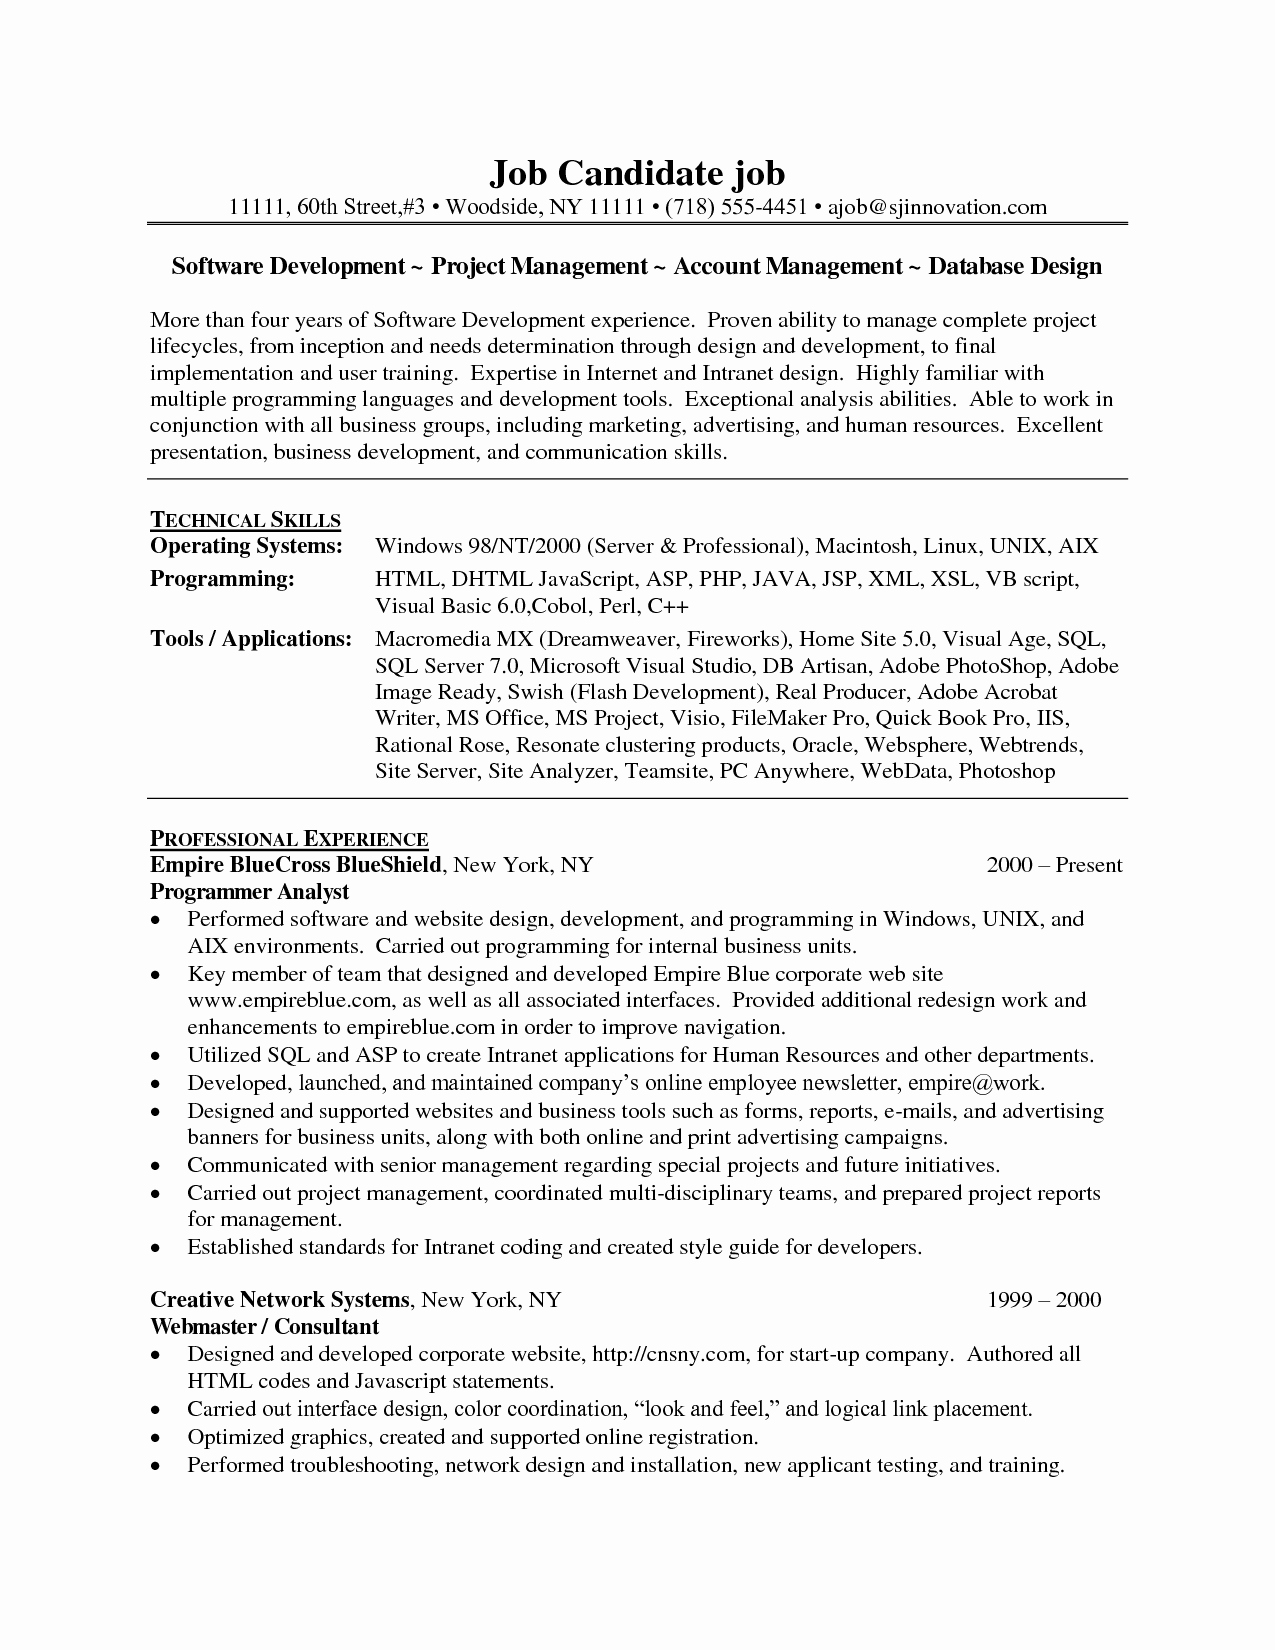 Sample Resume for software Engineer with Experience In